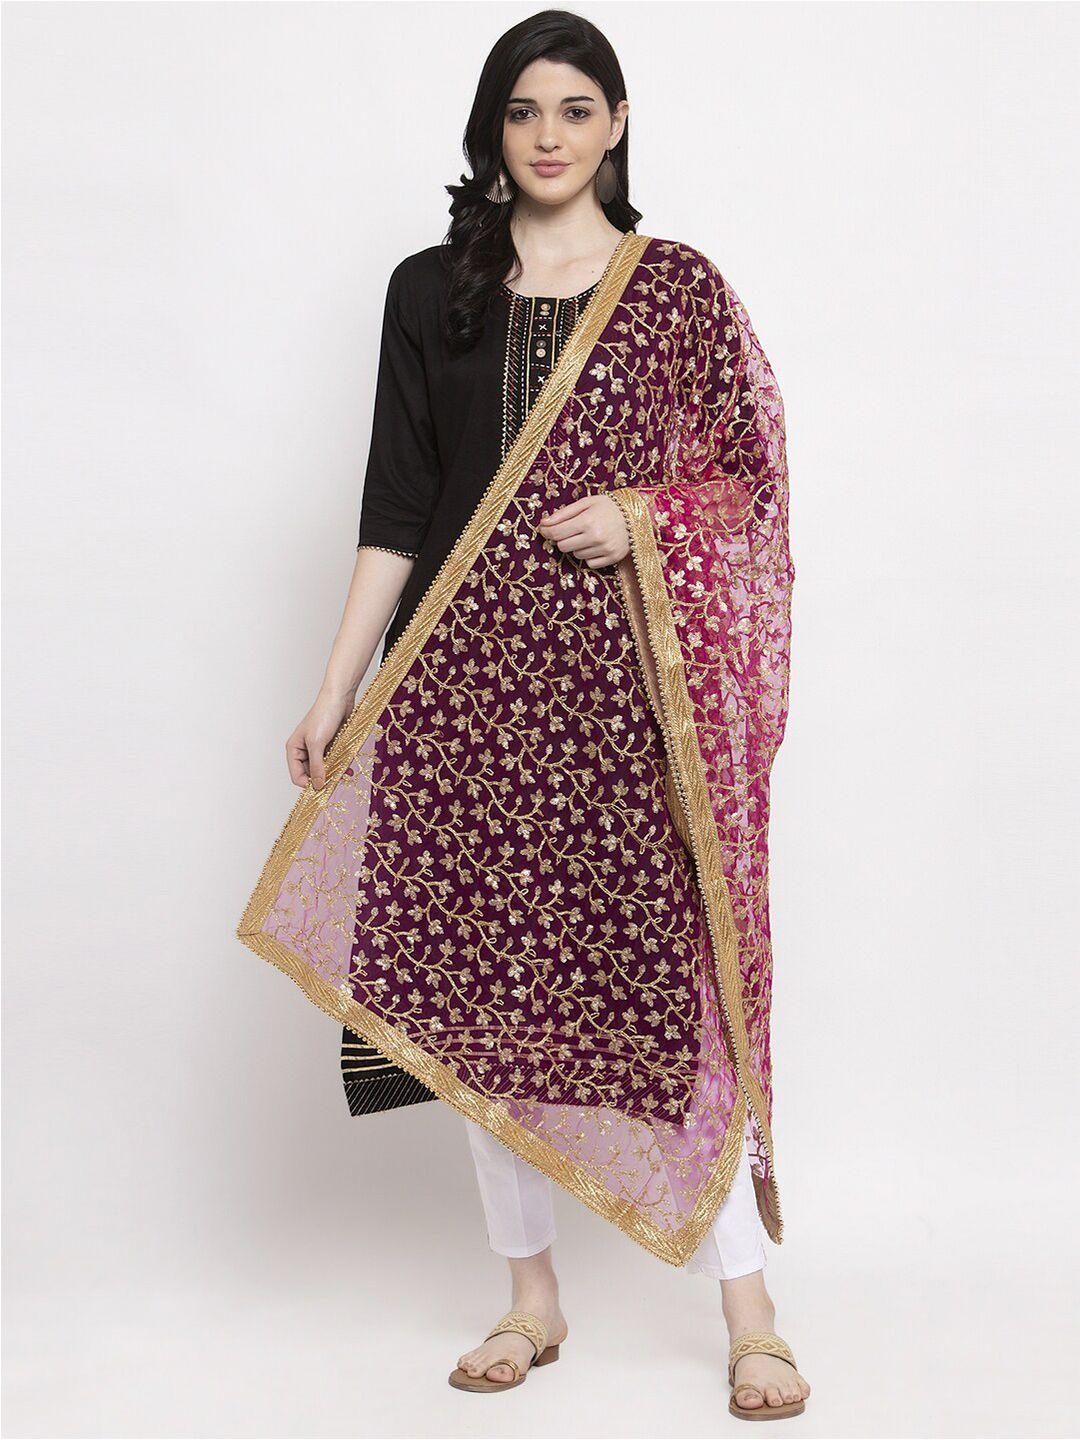 clora-creation-magenta-&-gold-toned-embroidered-dupatta-with-sequinned